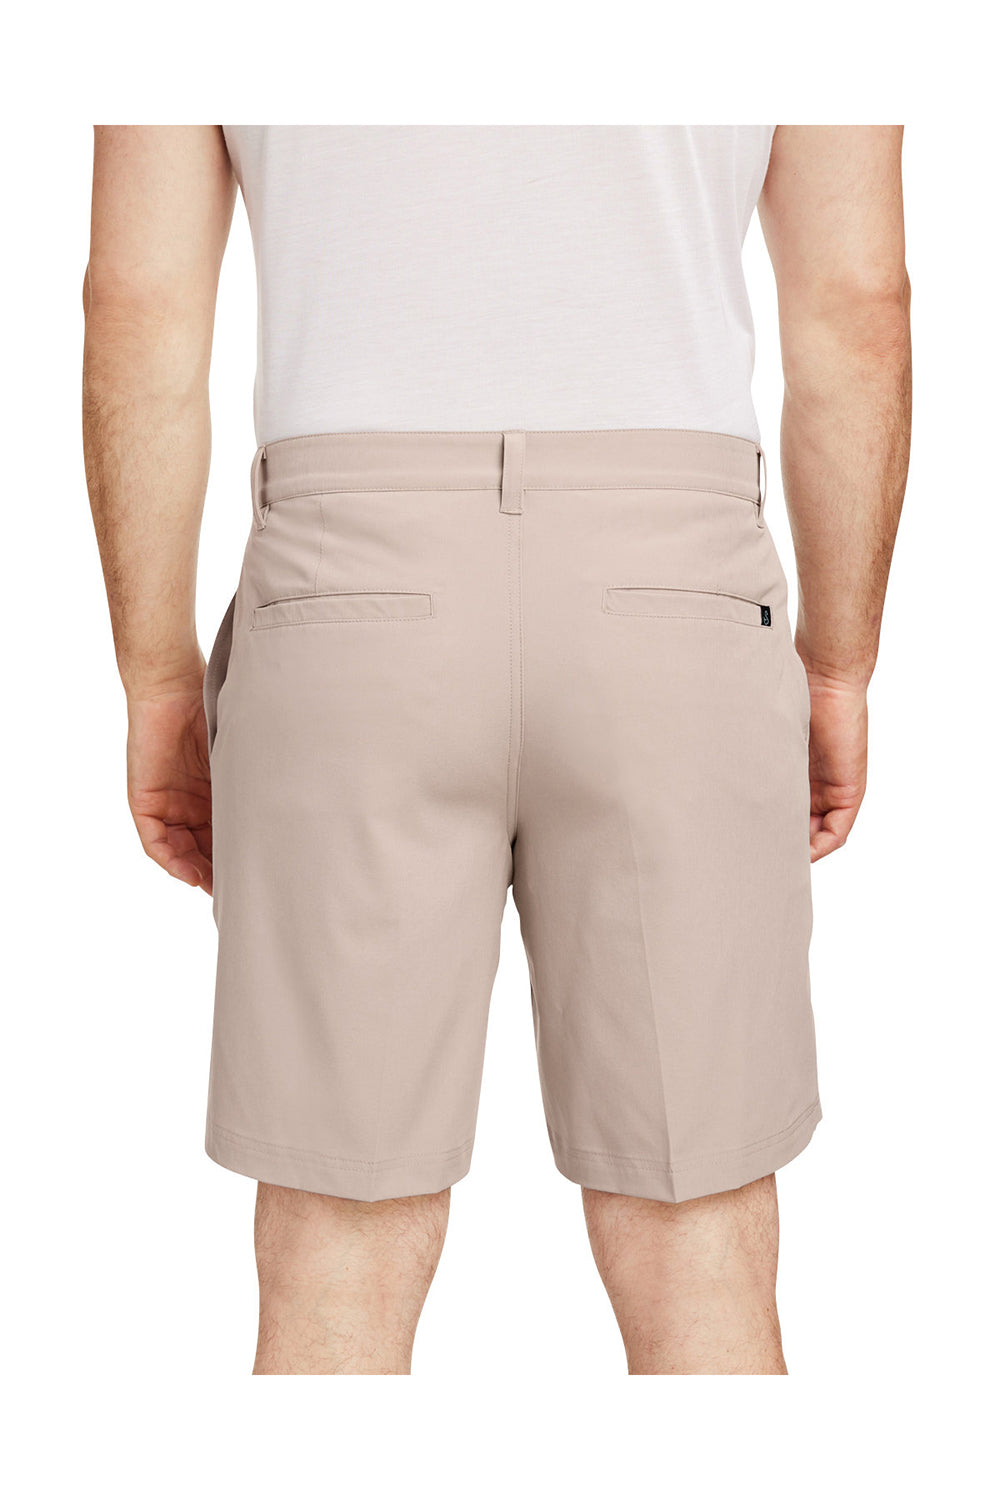 Swannies Golf SWS700 Mens Sully Shorts w/ Pockets Tan Back